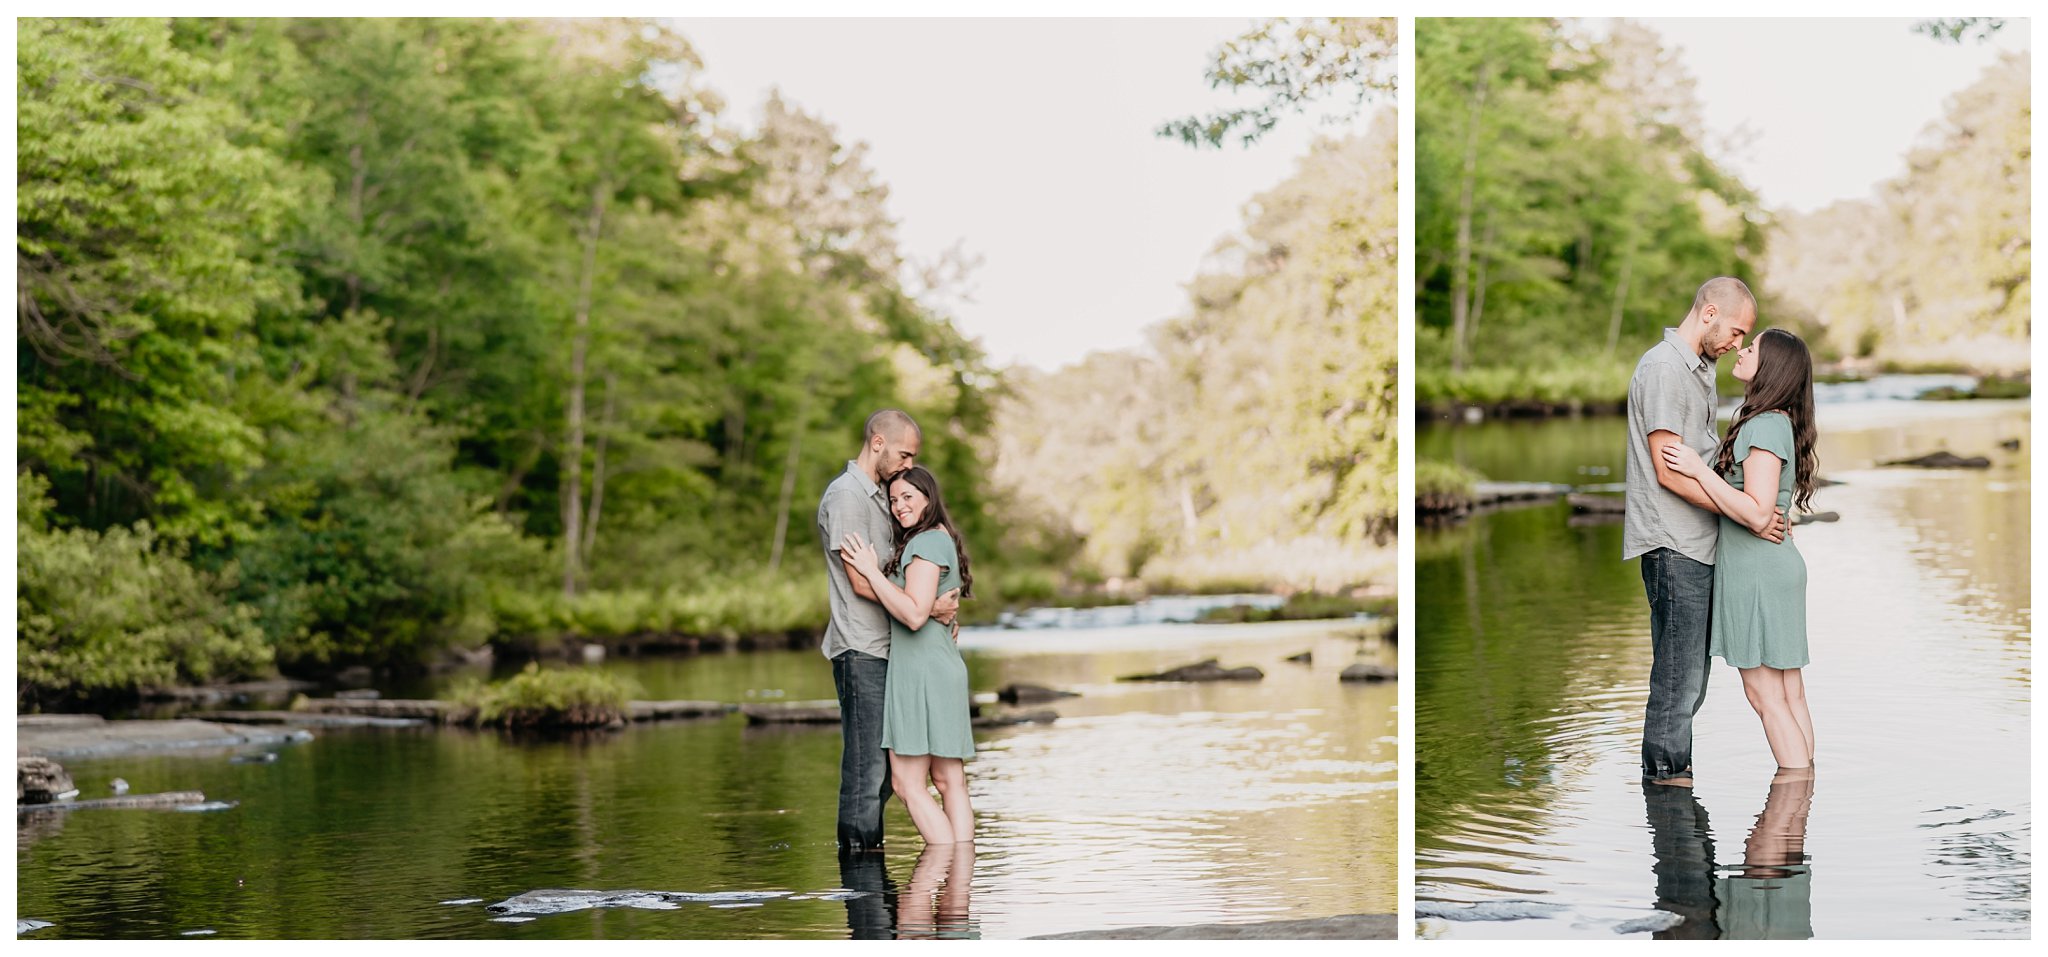 Salmon River Falls Engagement Session Joanna Young Photography_0009.jpg